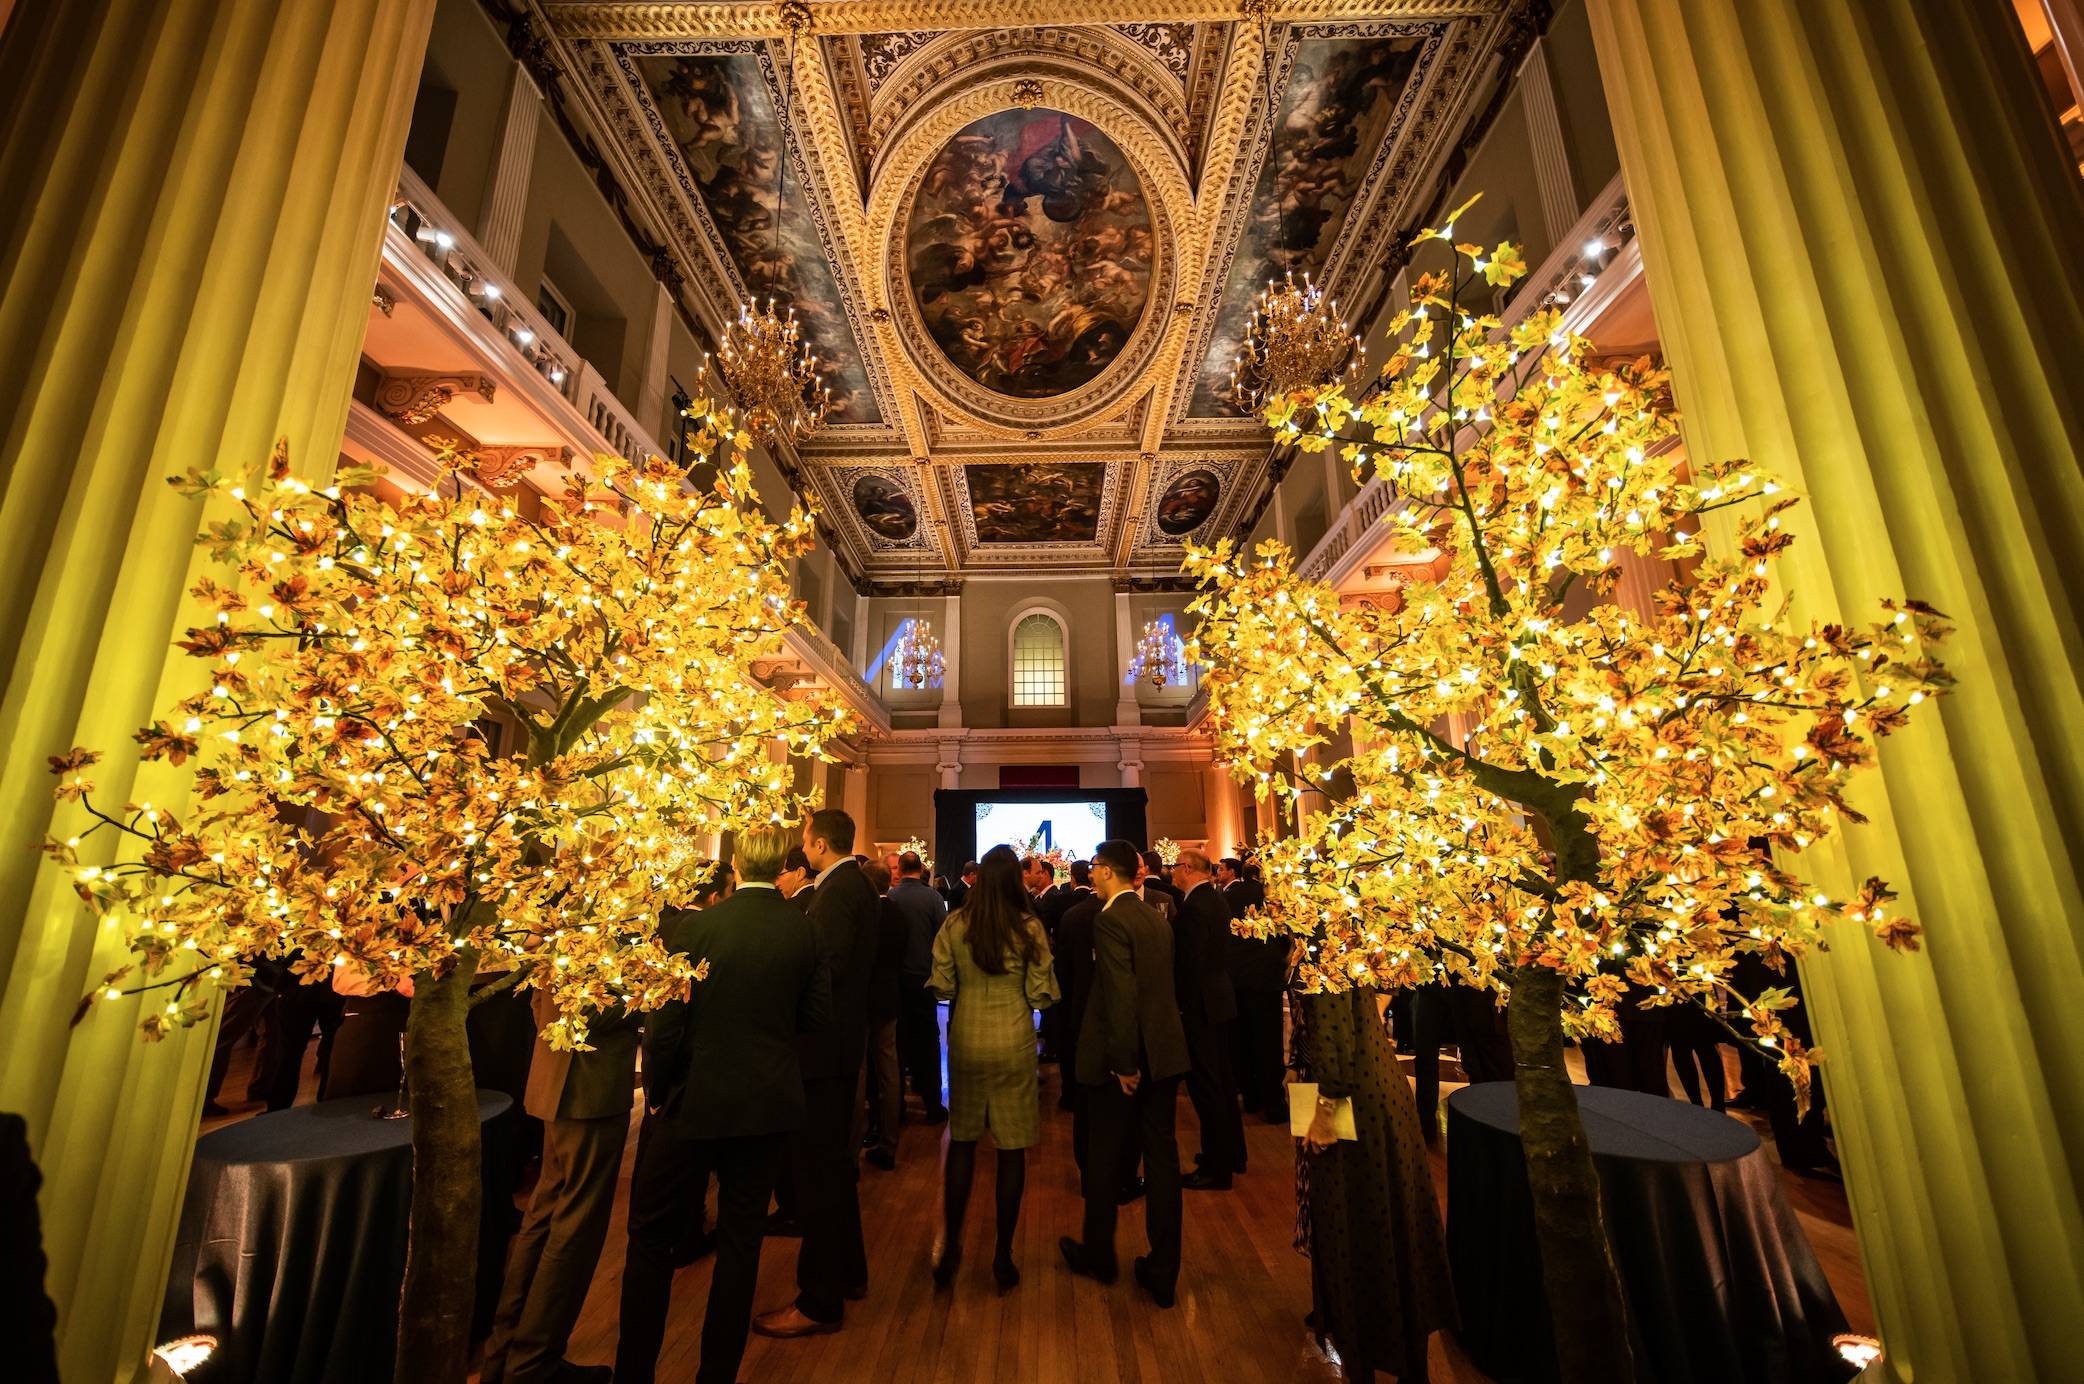 Events at Banqueting House, Party Planner London, parties in a palace, party planners for the palaces, Twilight trees reception drinks, Twilight trees at Banqueting House, Gold led trees, london event planner